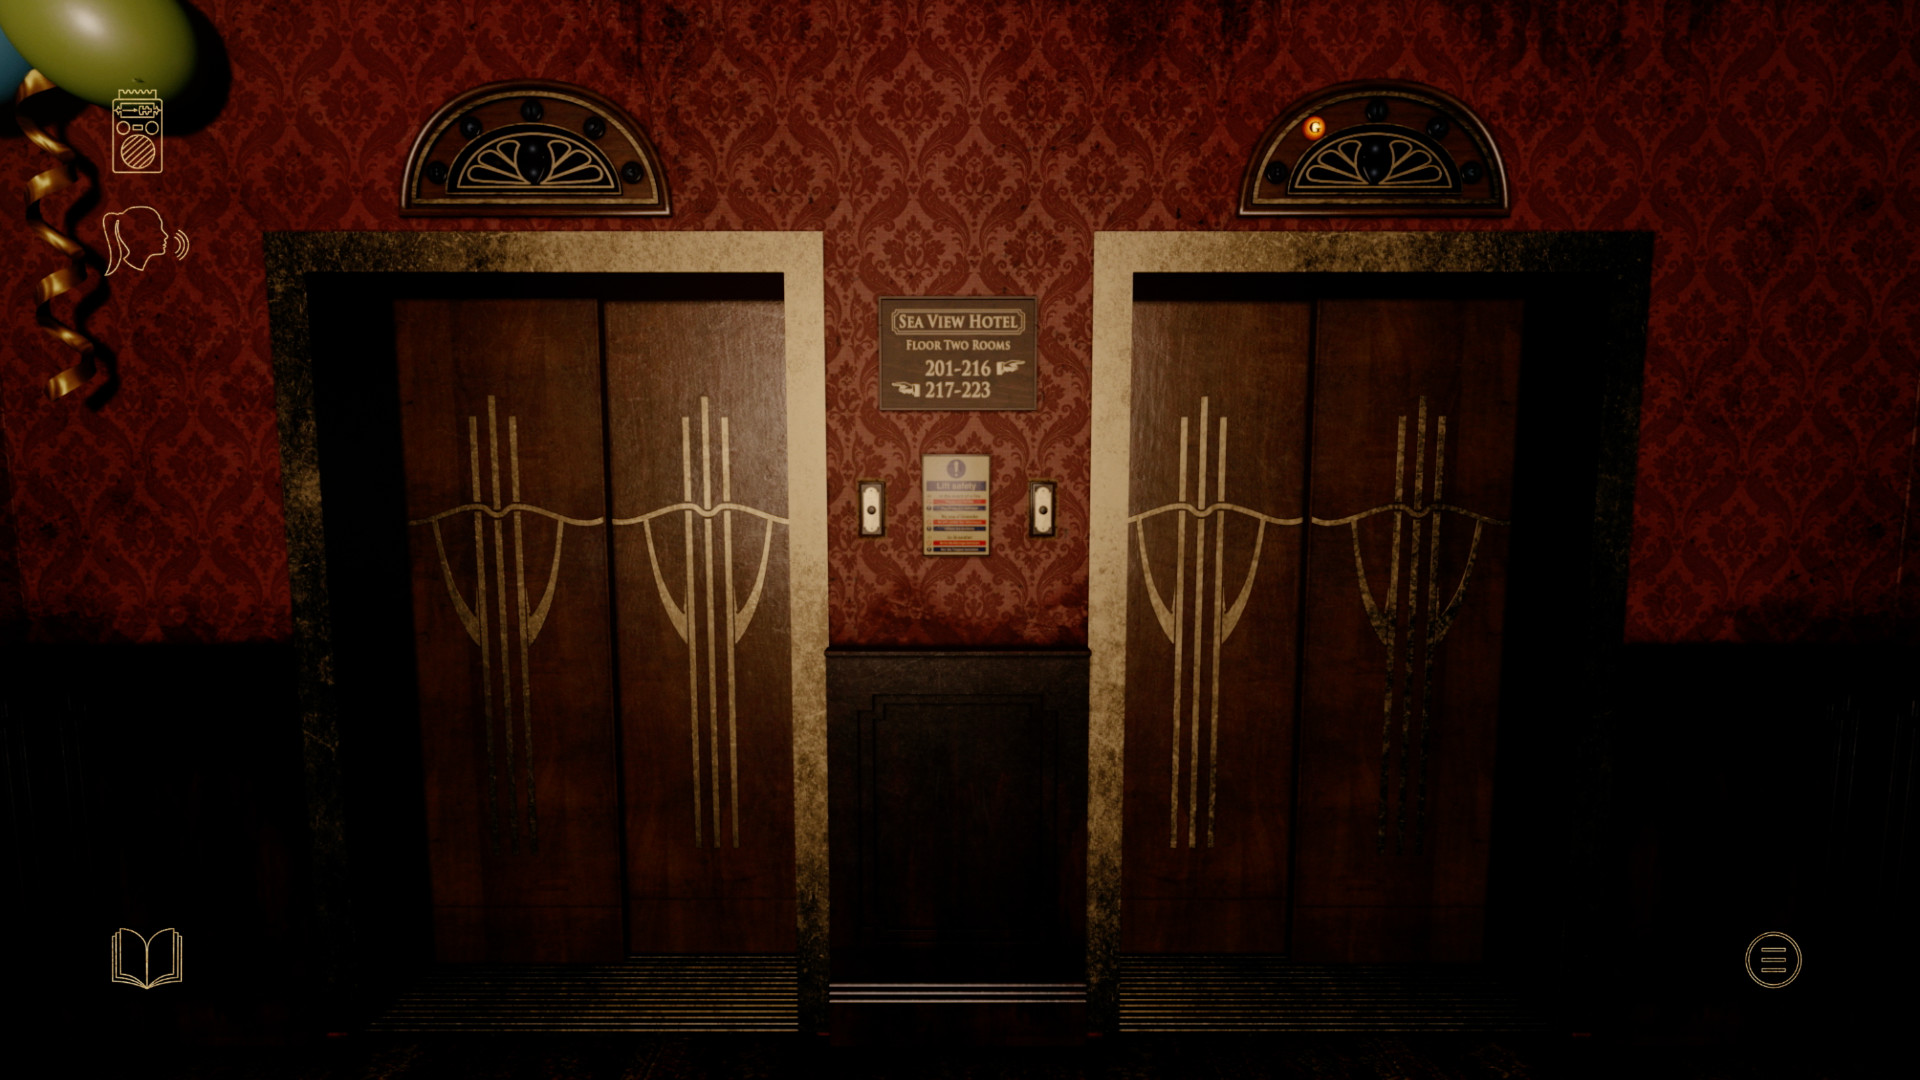 The Dead Rooms on Steam